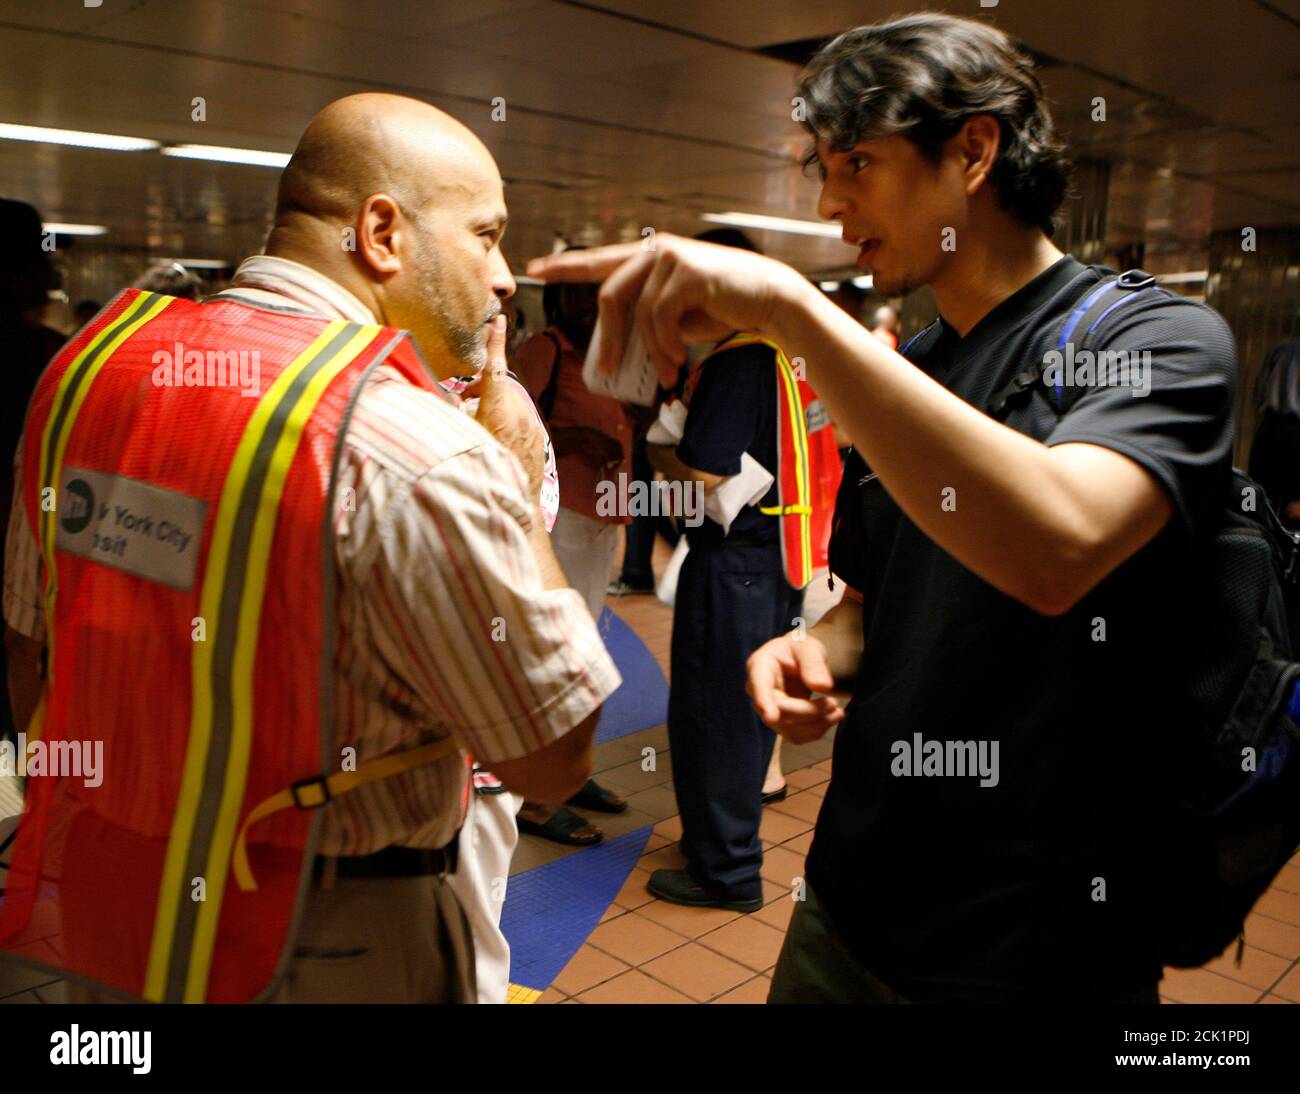 A New York MTA employee gives directions to a commuter during the evening rush, after the trains were shut down as a result of a power outage in parts of  New York, June 27, 2007. A power outage struck parts of Manhattan's wealthy Upper East Side during a heat wave on Wednesday, shutting down some subway service and schools while forcing an evacuation of a major art museum.     REUTERS/Brendan McDermid (UNITED STATES) Stock Photo